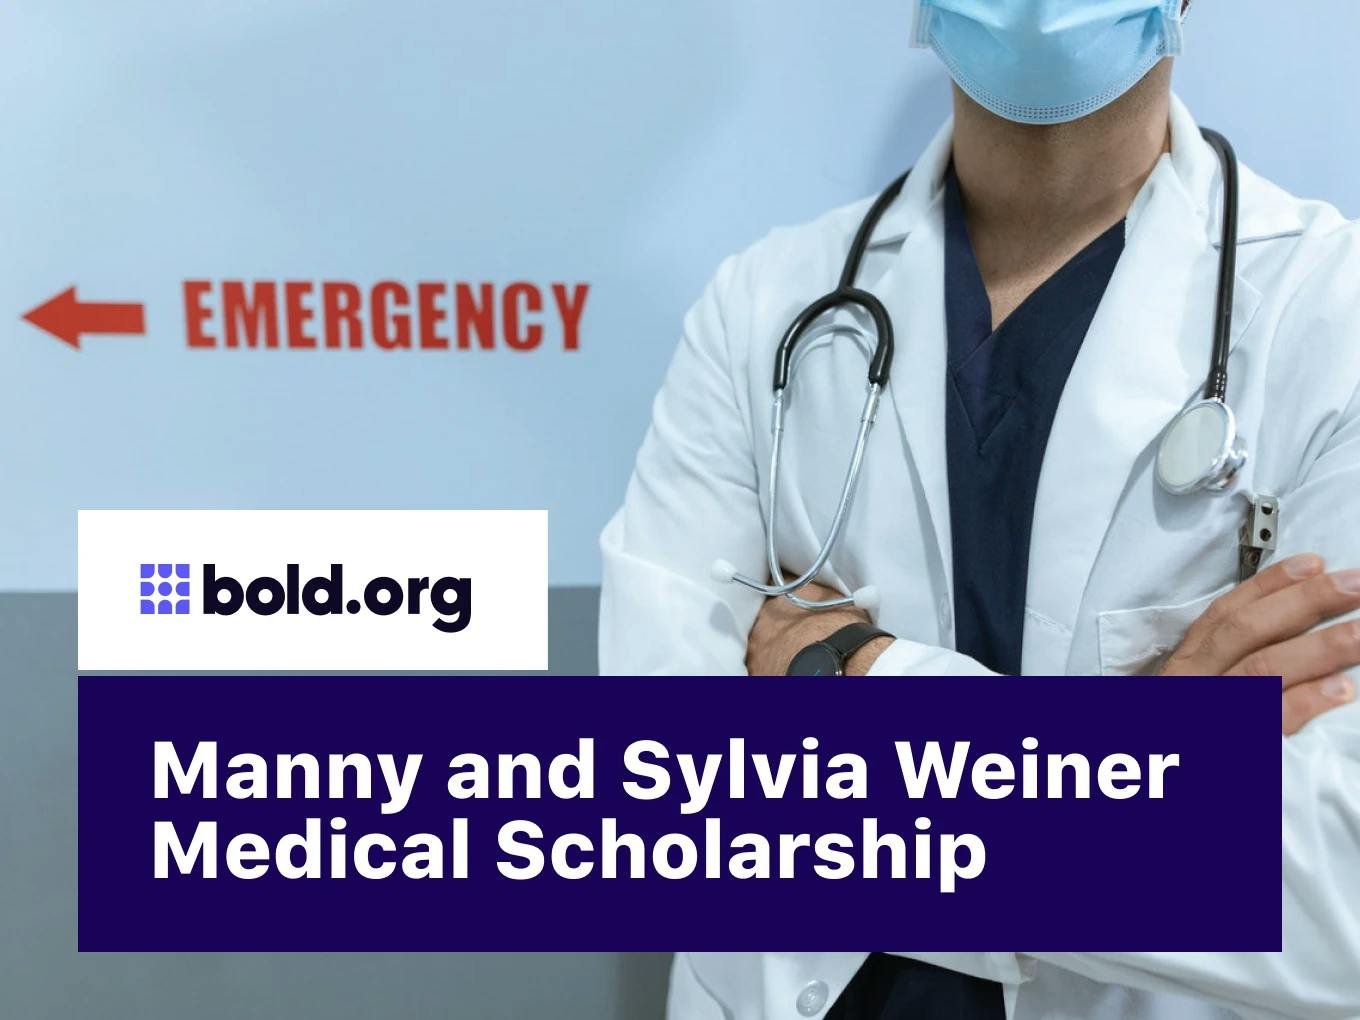 Manny and Sylvia Weiner Medical Scholarship